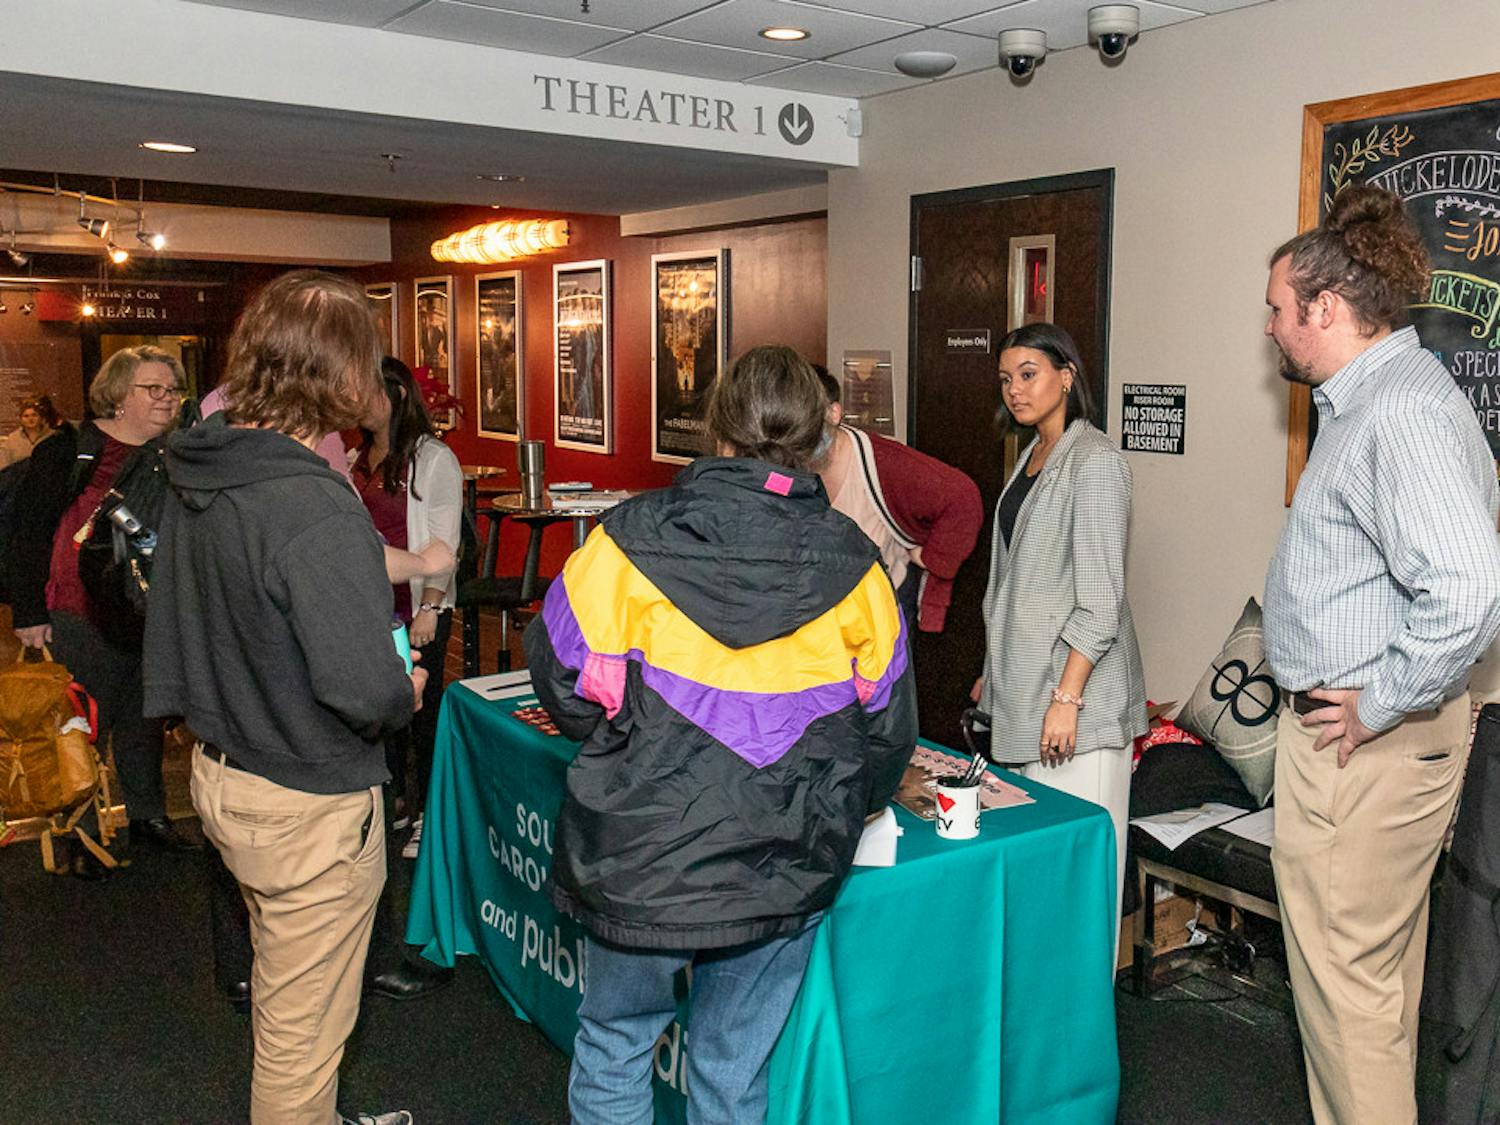 Members of SC Educational Television hand out information about Narcan Community Distributors, Narcan, and other useful information after the showing of "Love in the Time of Fentanyl" at the Nickelodeon Theater on Jan. 25, 2023. SC ETV teamed up with PBS to show this episode of their docu-series "Indie Lens Pop-Up." "Love in the Time of Fentanyl" officially premiered on Feb. 13, 2023.